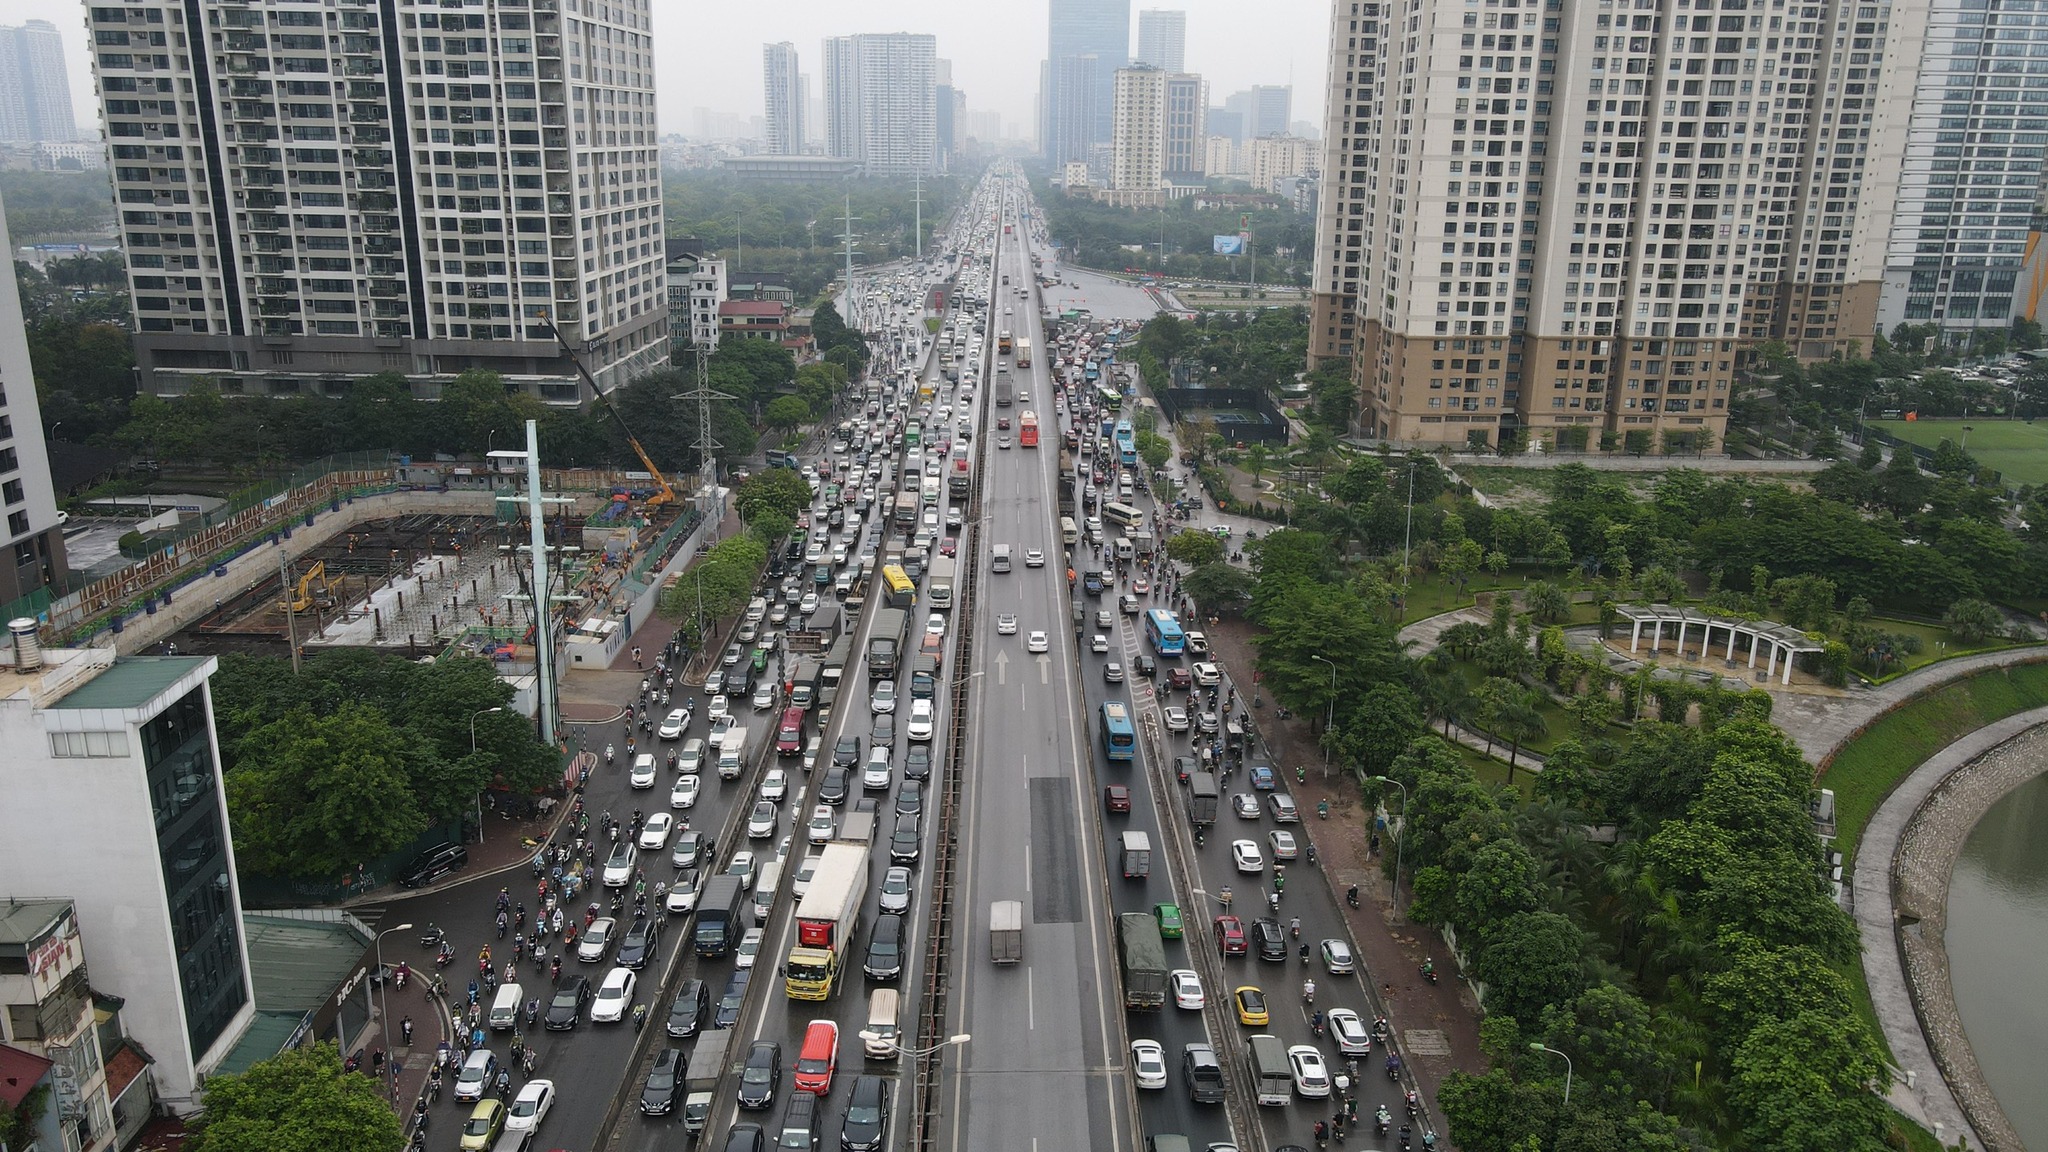 The queue of cars followed each other back to their hometown for the holidays of April 30 and May 1, the streets of Hanoi and Ho Chi Minh City were congested - April 11